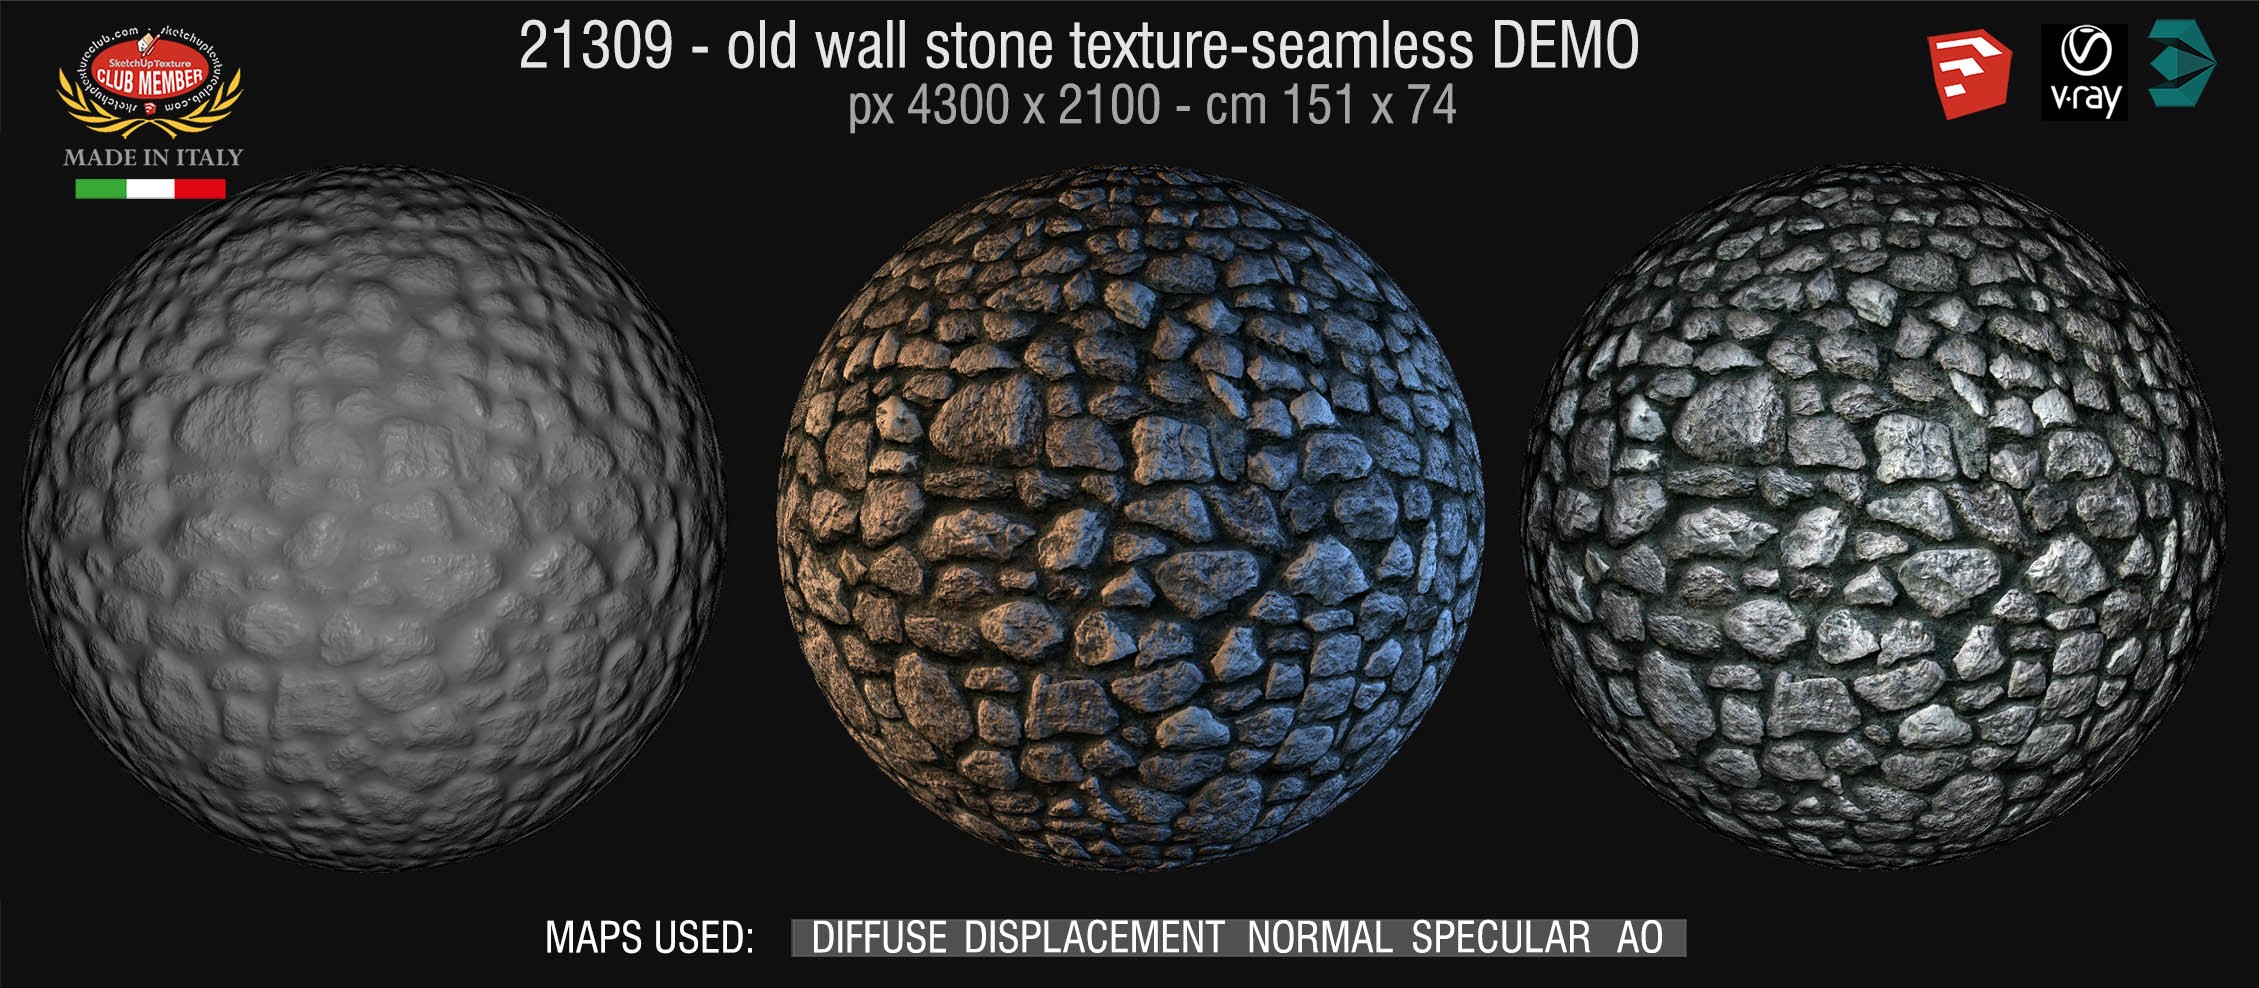 21309 HR Old wall stone texture seamless + maps DEMO